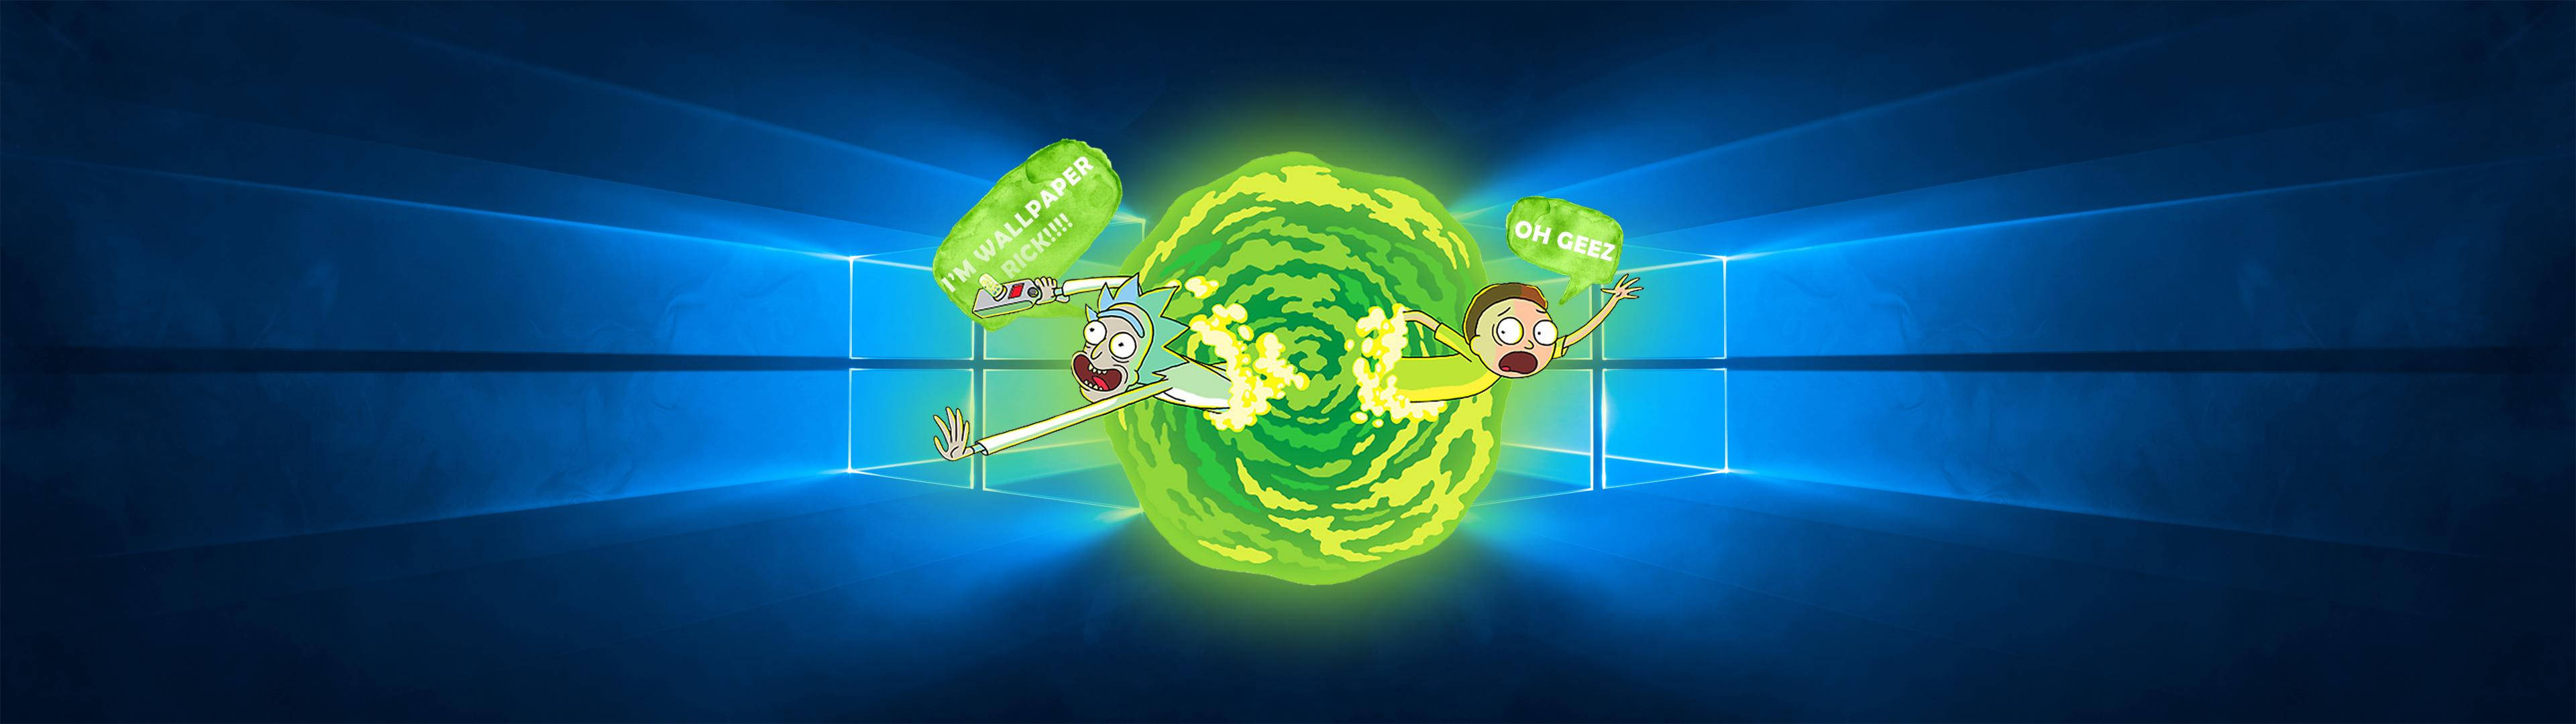 Rick And Morty Ultrawide Wallpapers